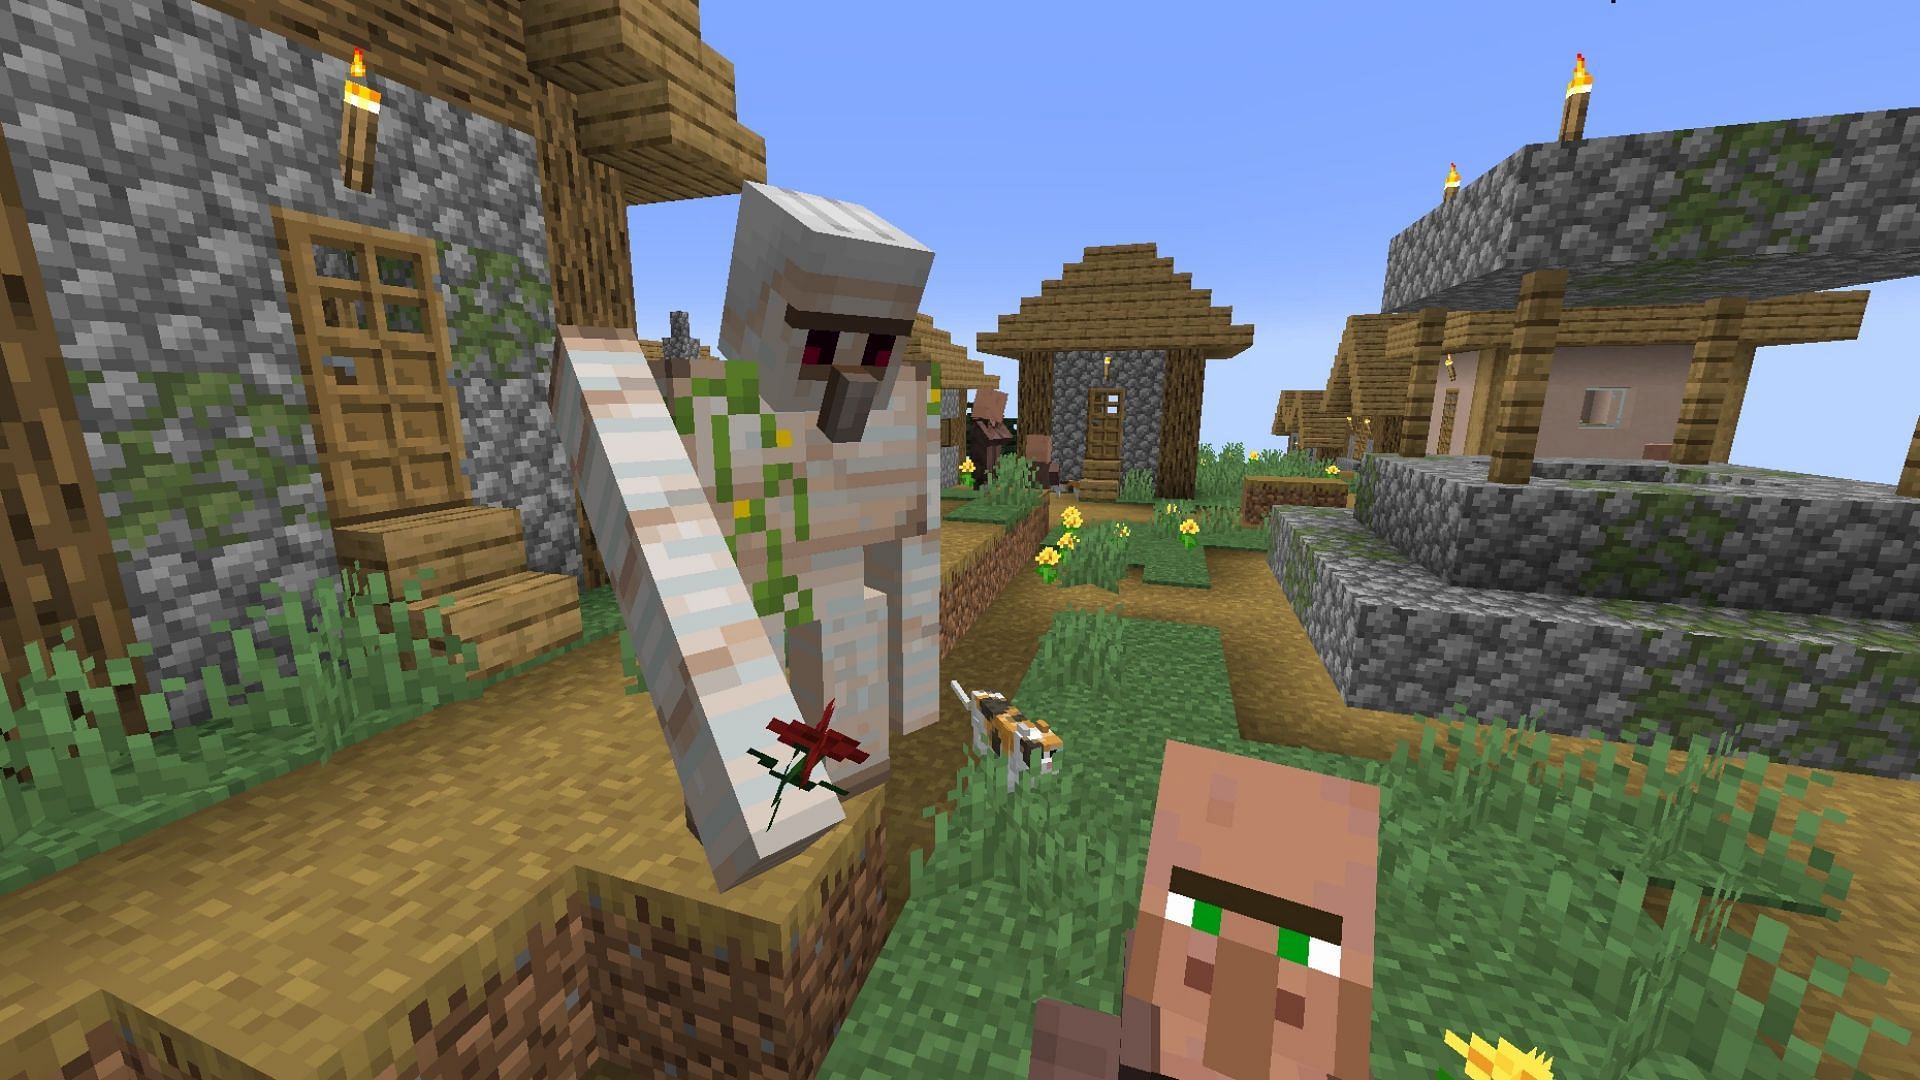 Iron Golems can occasionally give poppy flowers to villagers in Minecraft (Image via Mojang)